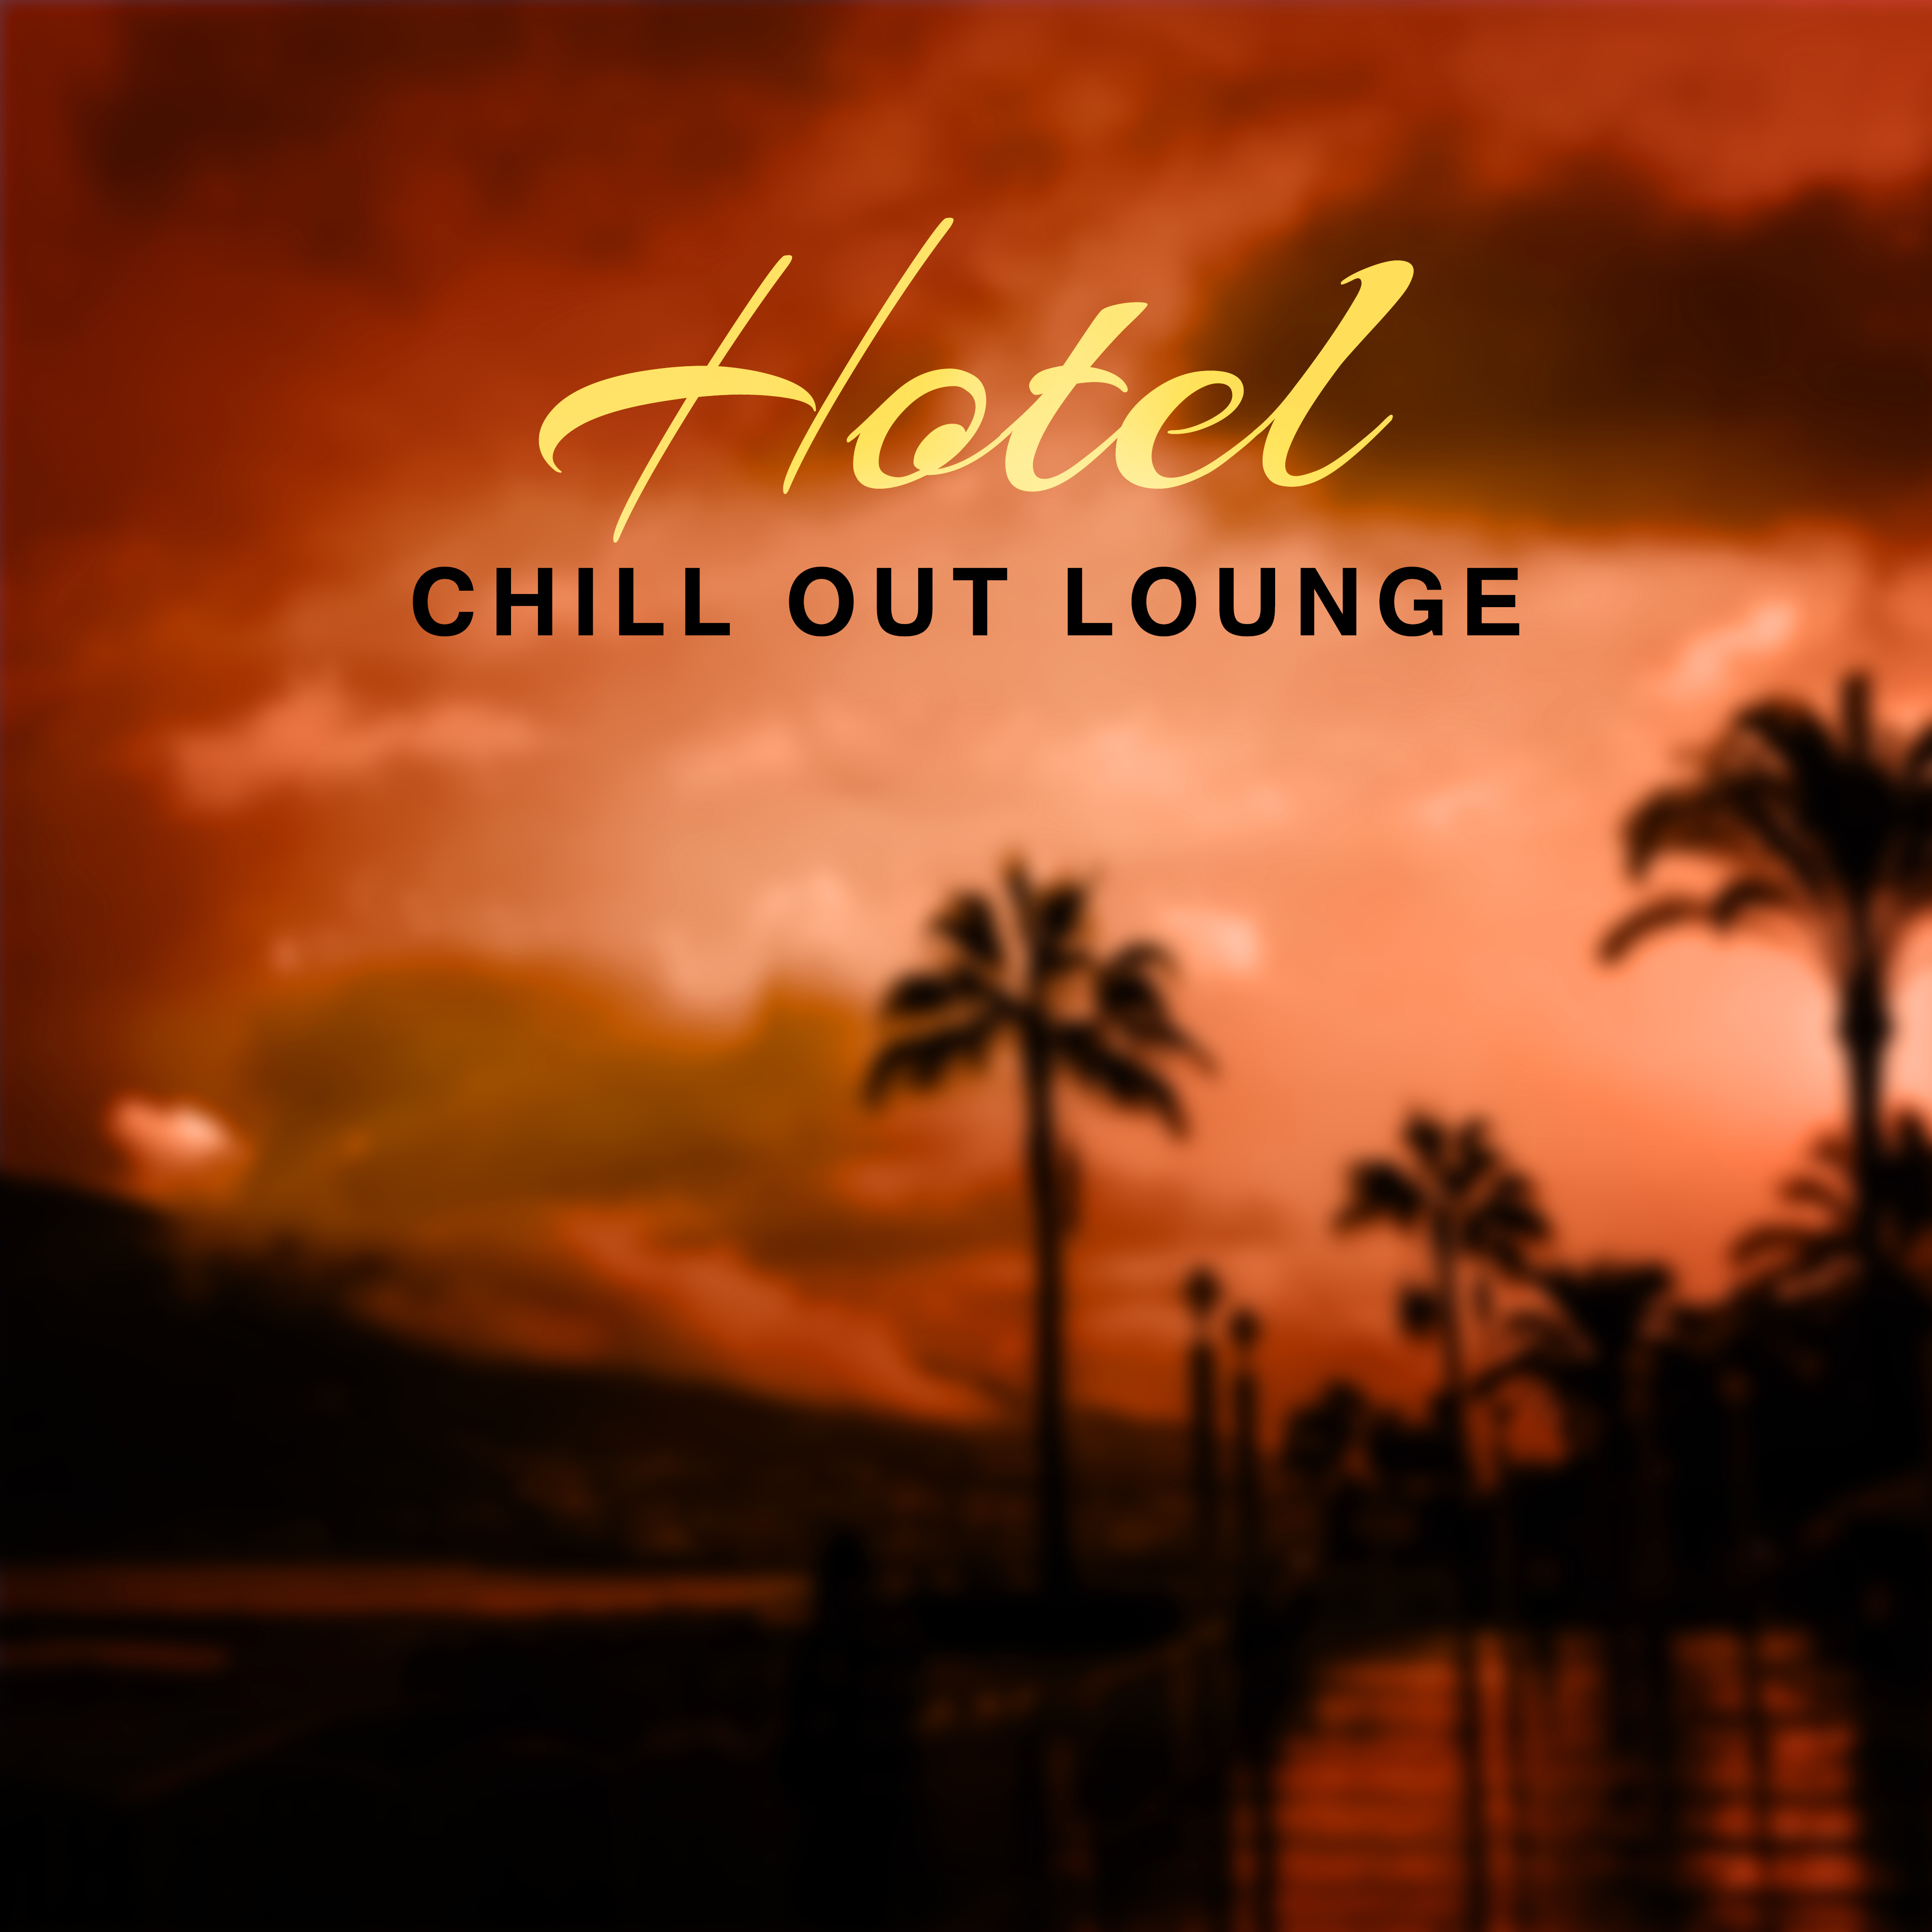 Hotel Chill Out Lounge – Soft Sounds for Hotel Chill, Relaxation Music, Summer Journey